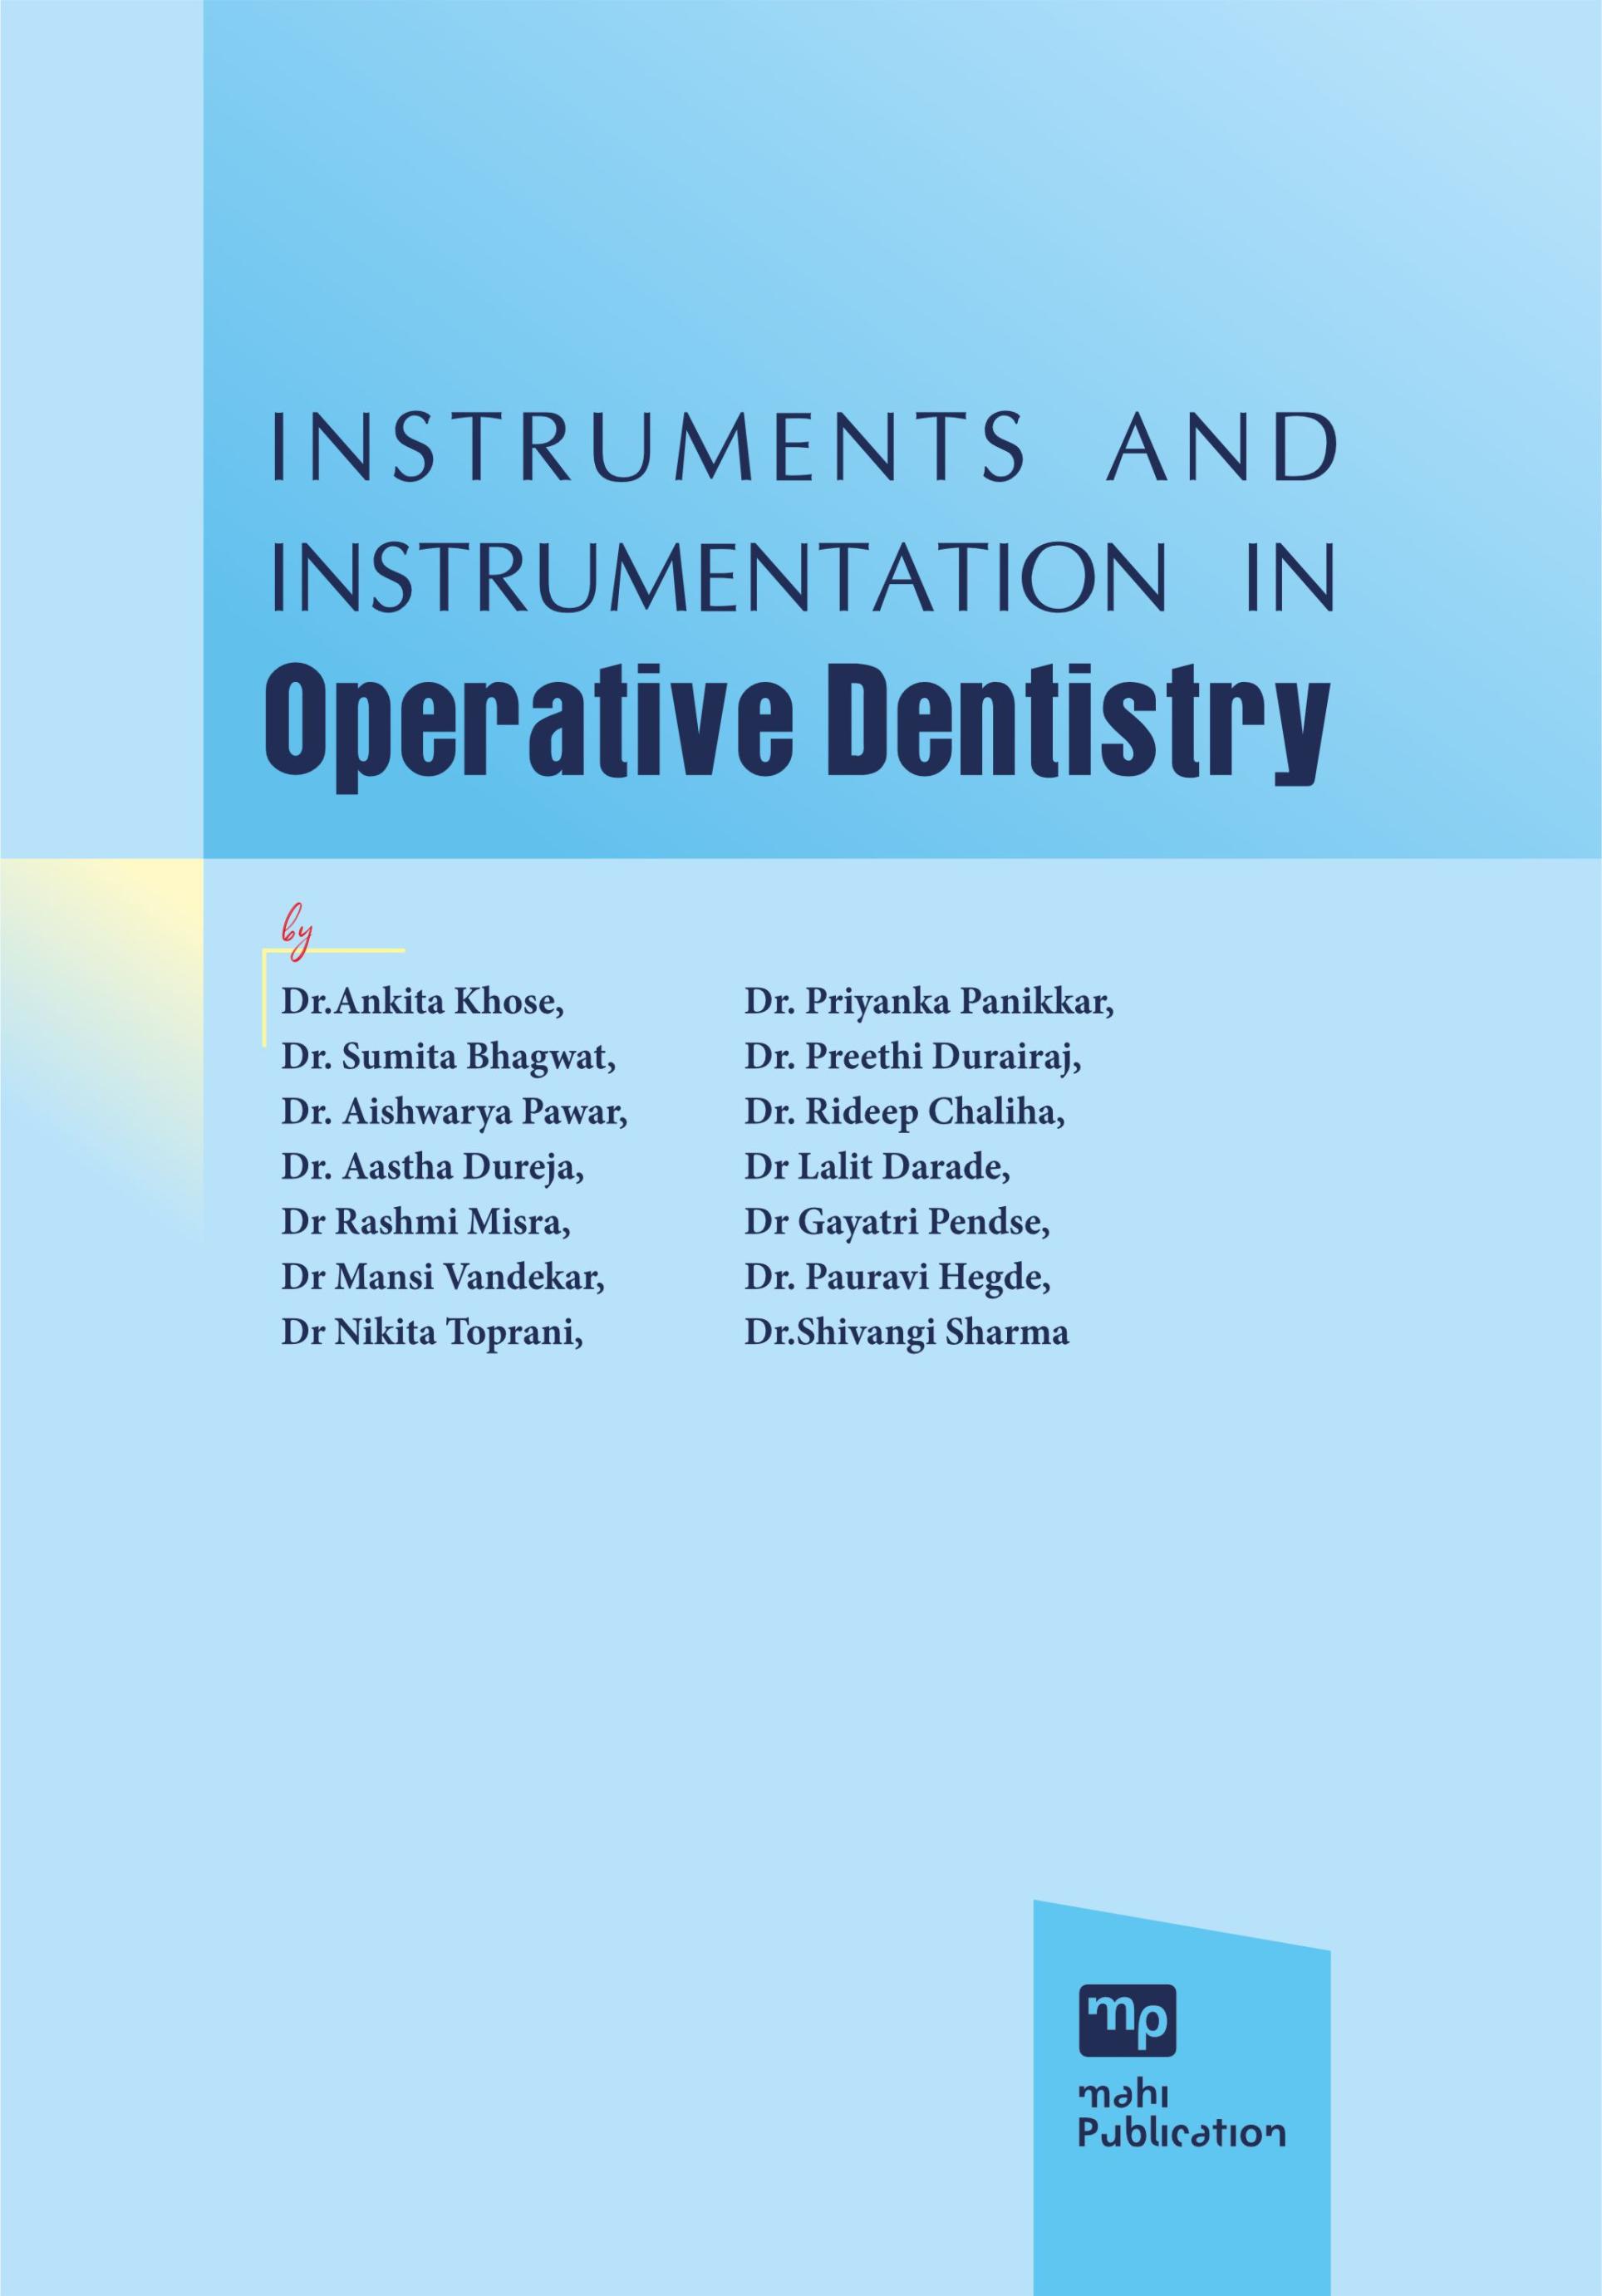 Instruments and Instrumentation in Operative Dentistry